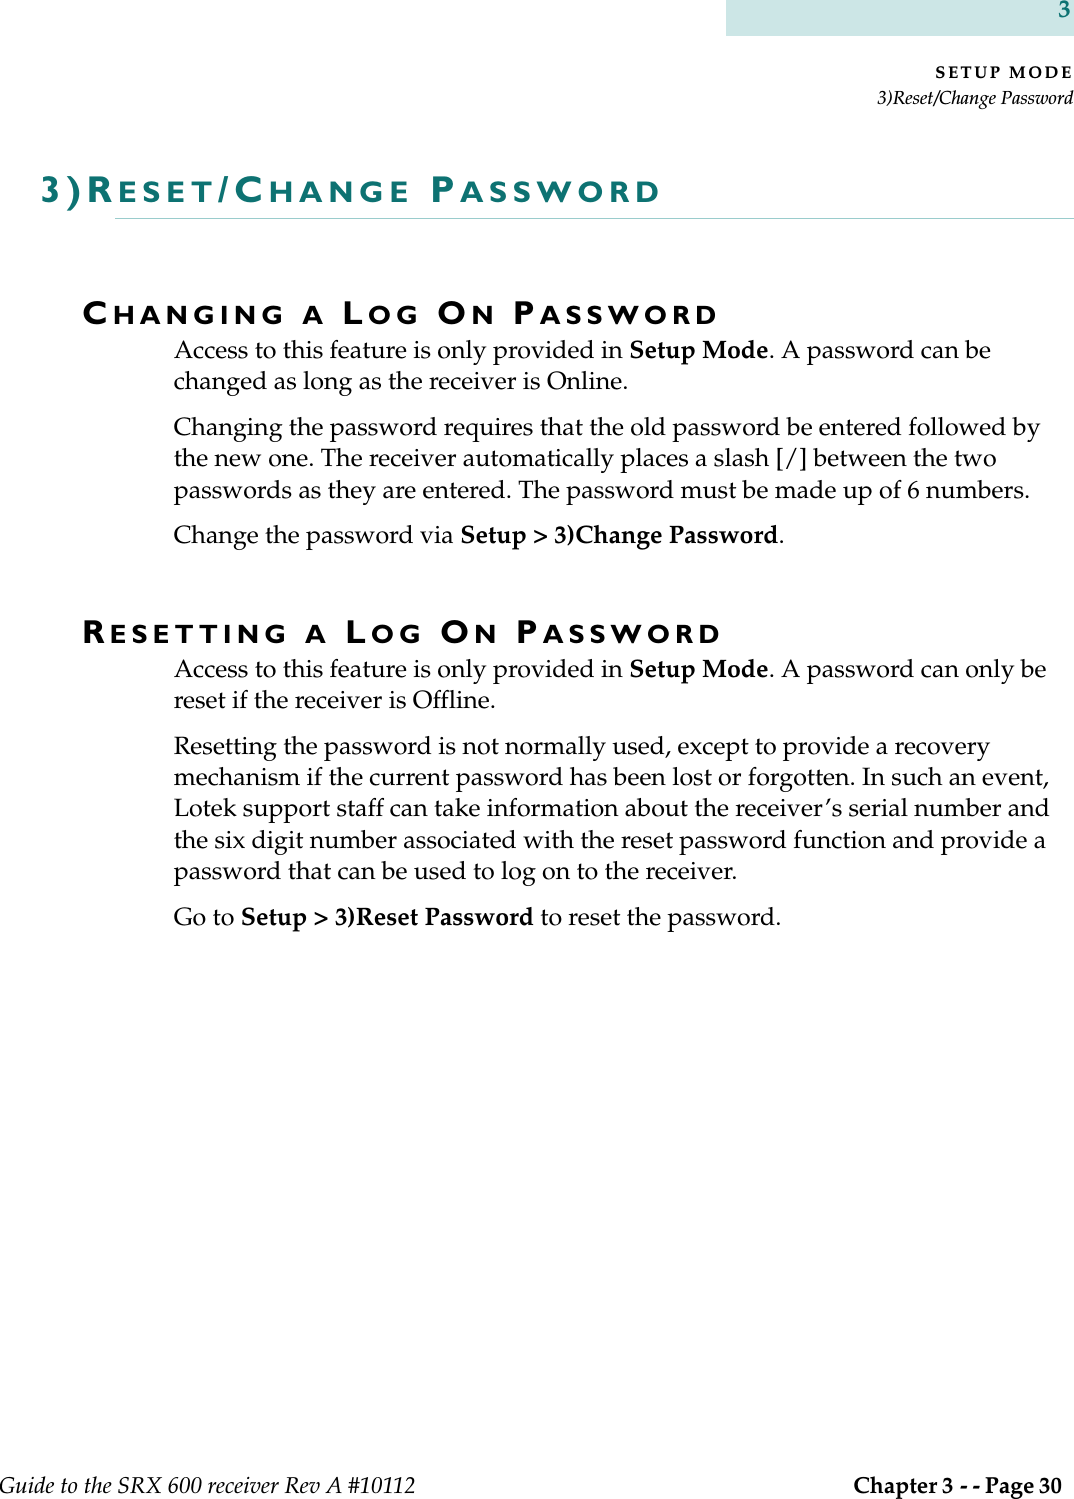 SETUP MODE3)Reset/Change PasswordGuide to the SRX 600 receiver Rev A #10112  Chapter 3 - - Page 30 33)RESET/CHANGE PASSWORDCHANGING A LOG ON PASSWORDAccess to this feature is only provided in Setup Mode. A password can be changed as long as the receiver is Online. Changing the password requires that the old password be entered followed by the new one. The receiver automatically places a slash [/] between the two passwords as they are entered. The password must be made up of 6 numbers.Change the password via Setup &gt; 3)Change Password.RESETTING A LOG ON PASSWORDAccess to this feature is only provided in Setup Mode. A password can only be reset if the receiver is Offline.Resetting the password is not normally used, except to provide a recovery mechanism if the current password has been lost or forgotten. In such an event, Lotek support staff can take information about the receiver’s serial number and the six digit number associated with the reset password function and provide a password that can be used to log on to the receiver. Go to Setup &gt; 3)Reset Password to reset the password.